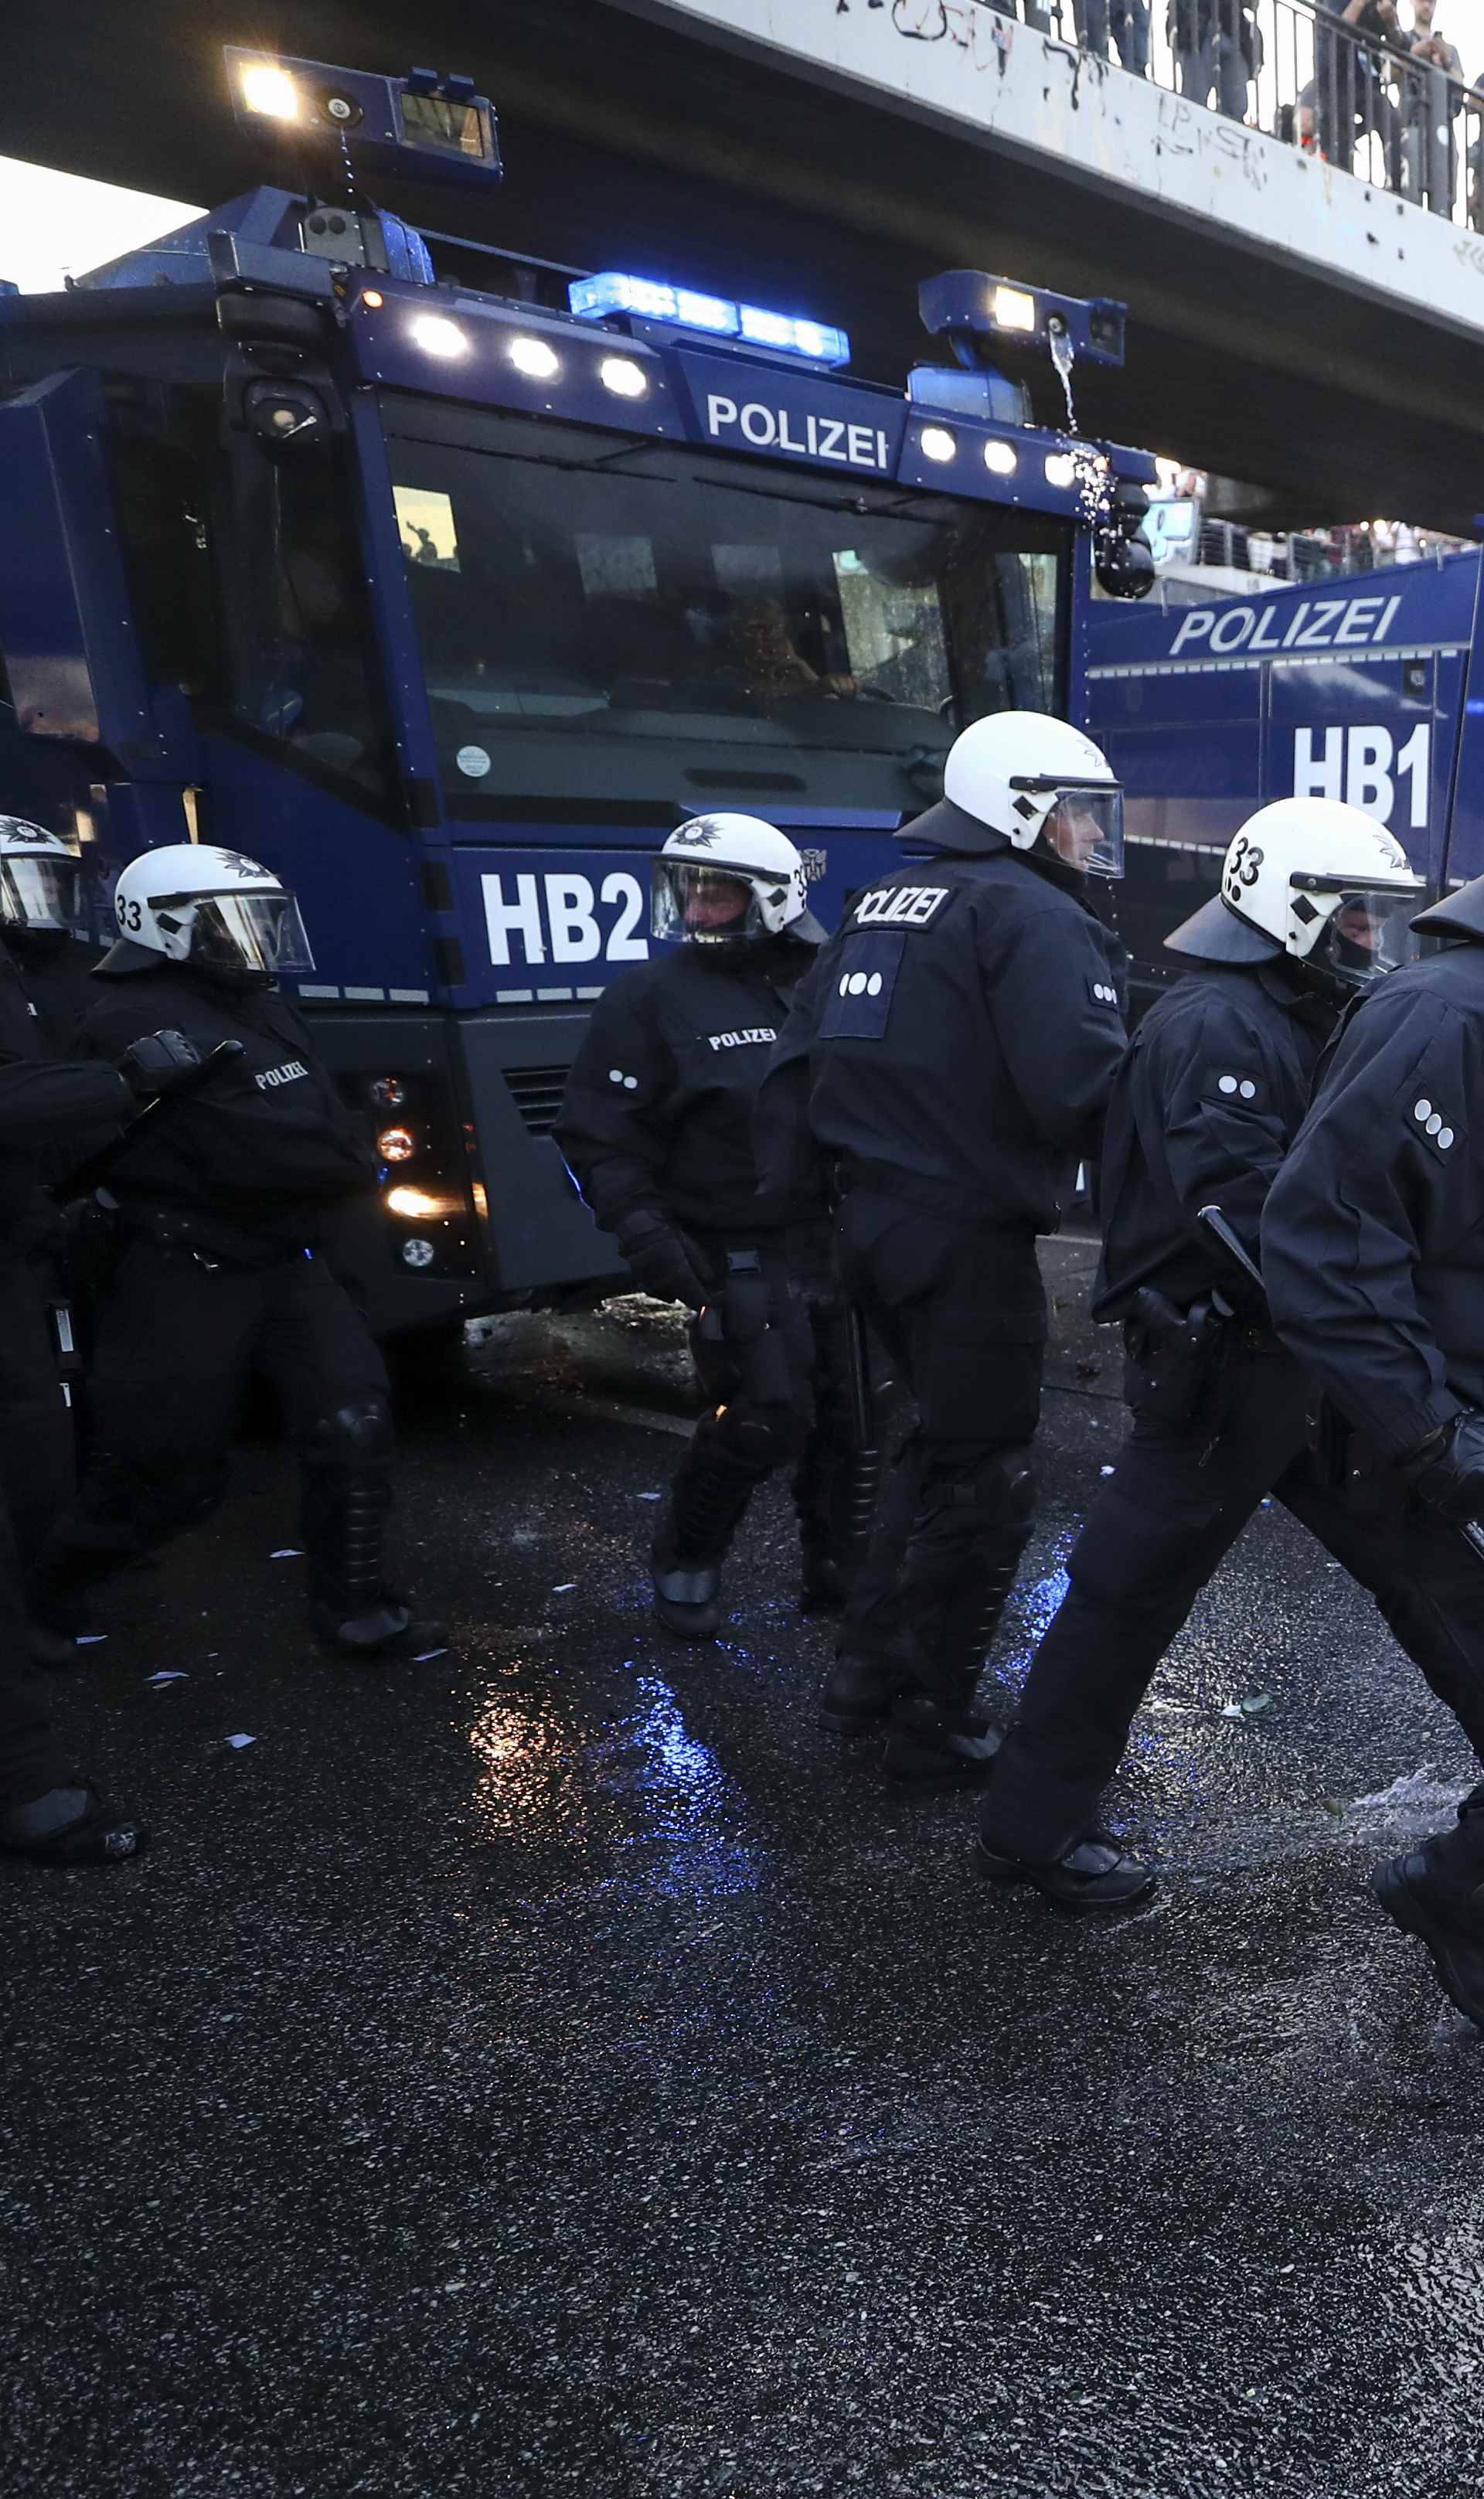 German riot police use water cannons against protesters during the demonstrations during the G20 summit in Hamburg